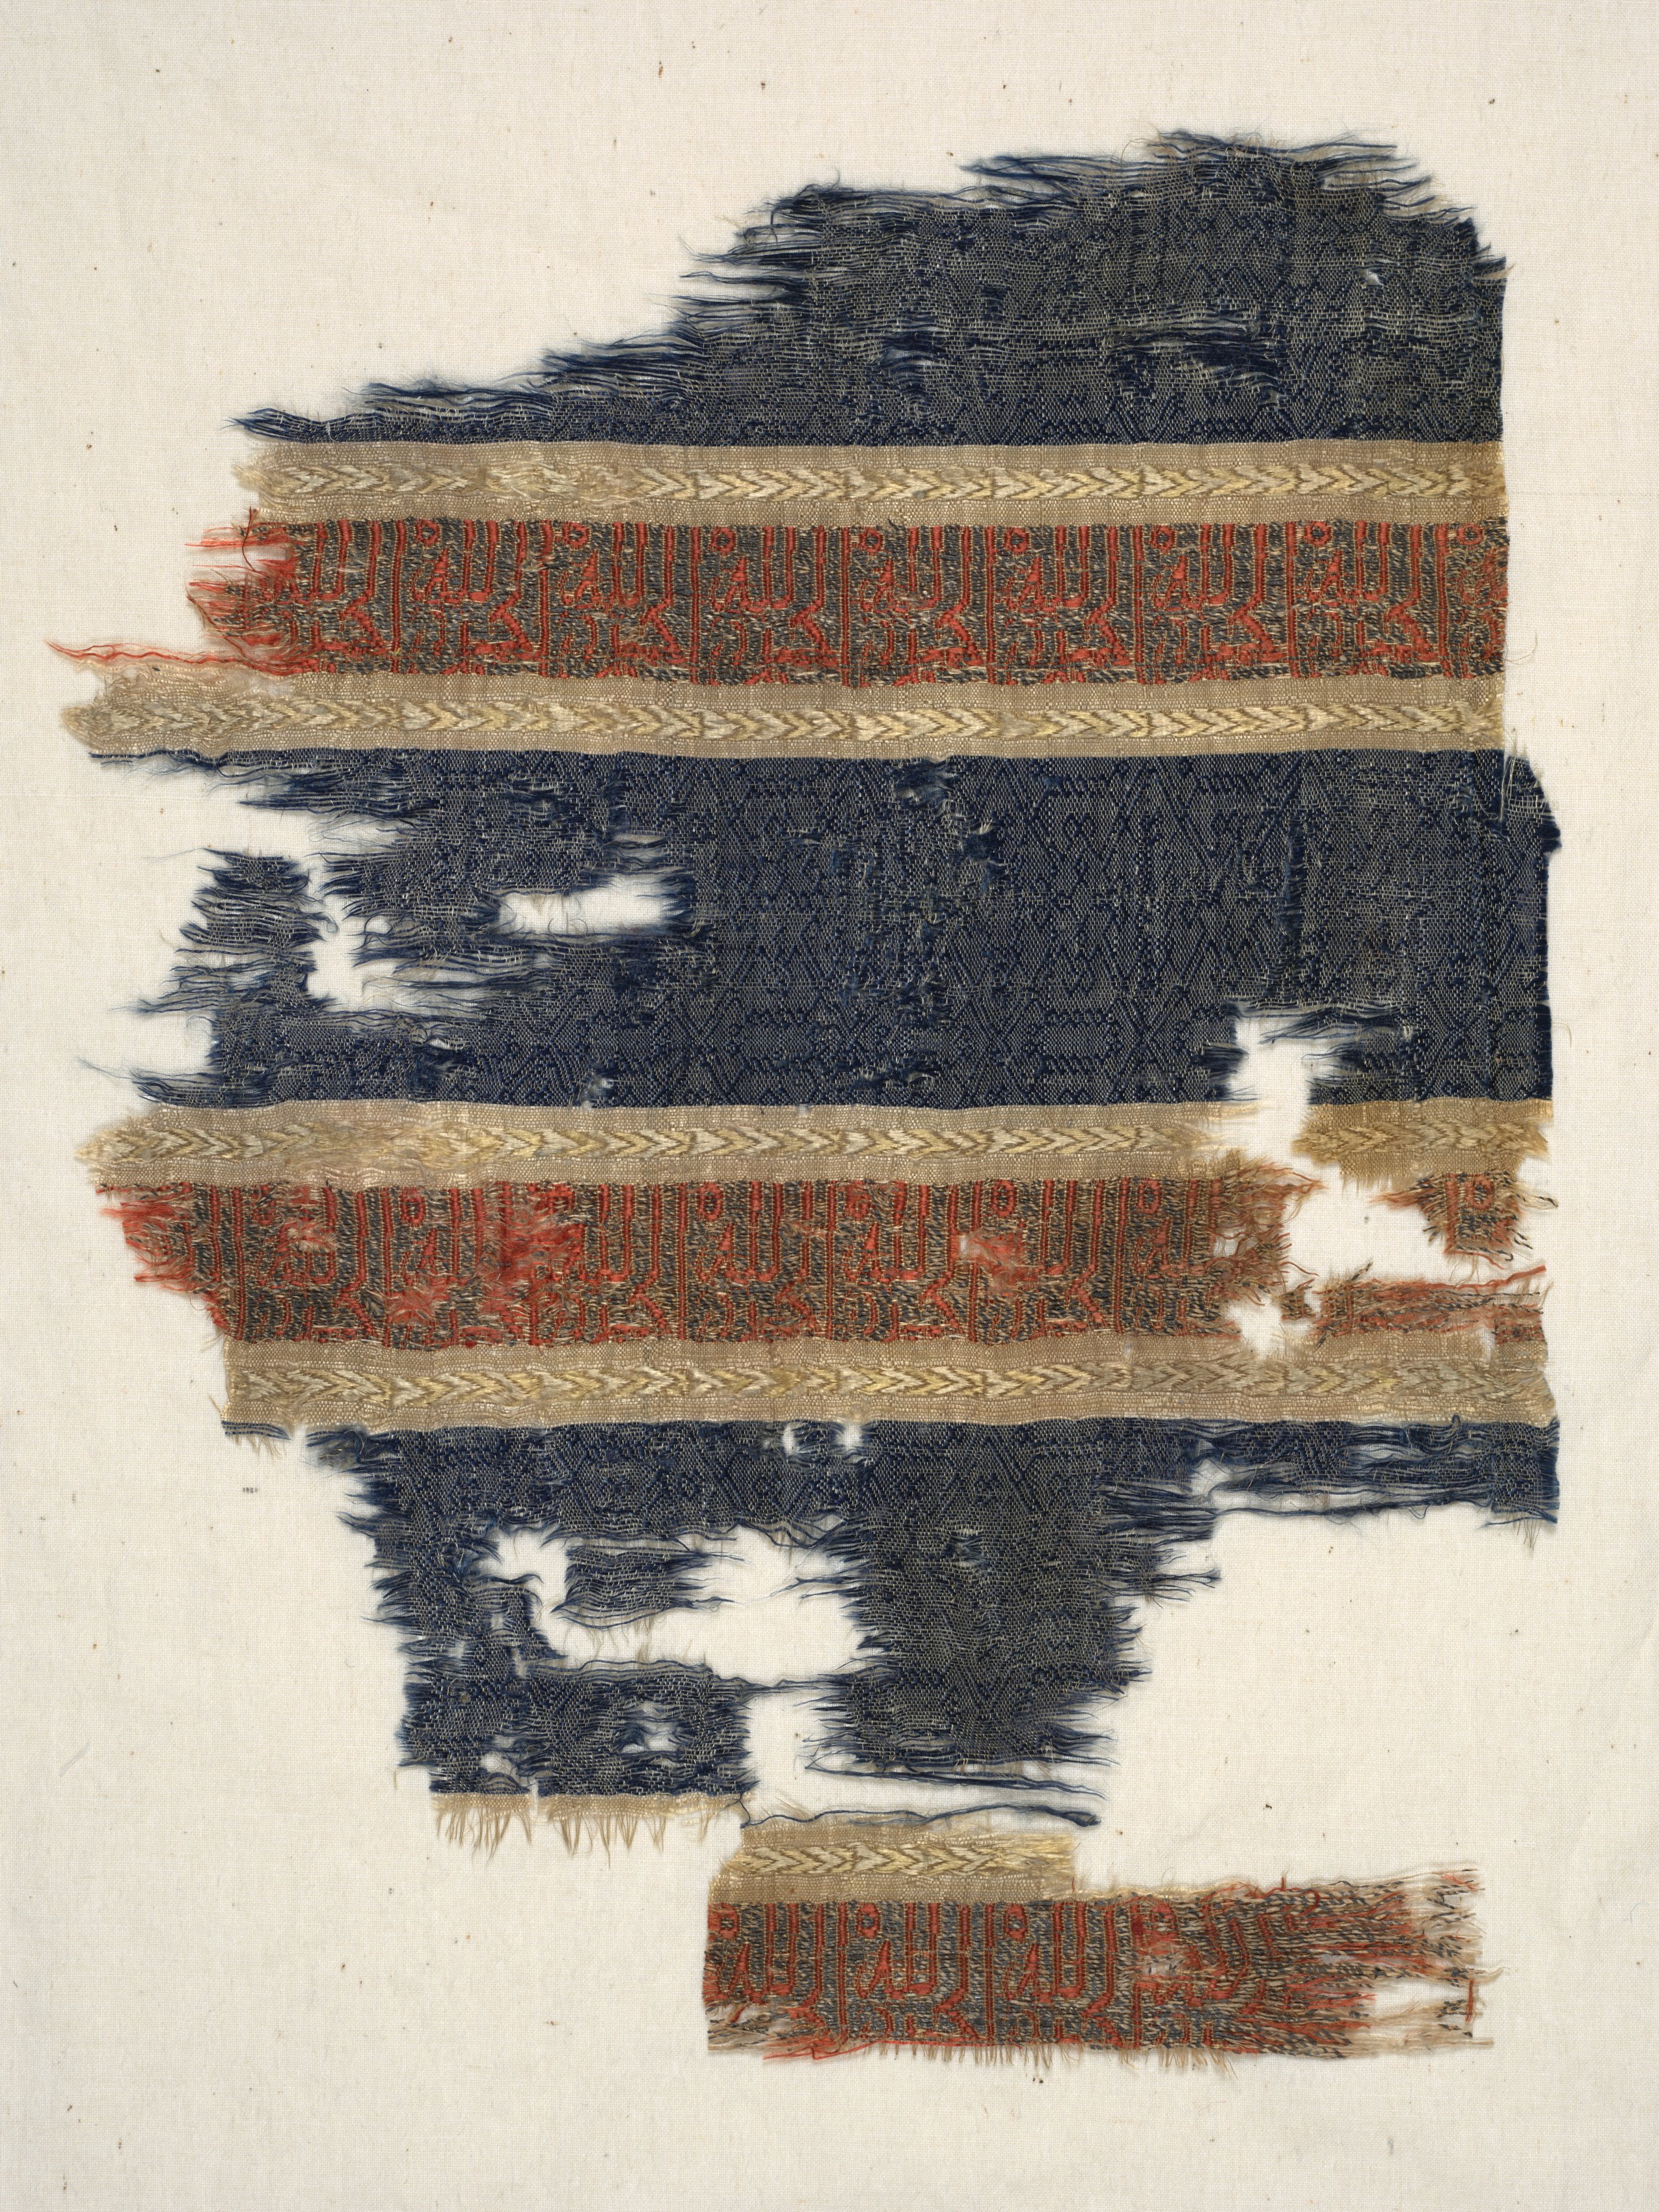 Silk fragment with decorated and inscribed bands, from the tomb of Don Felipe